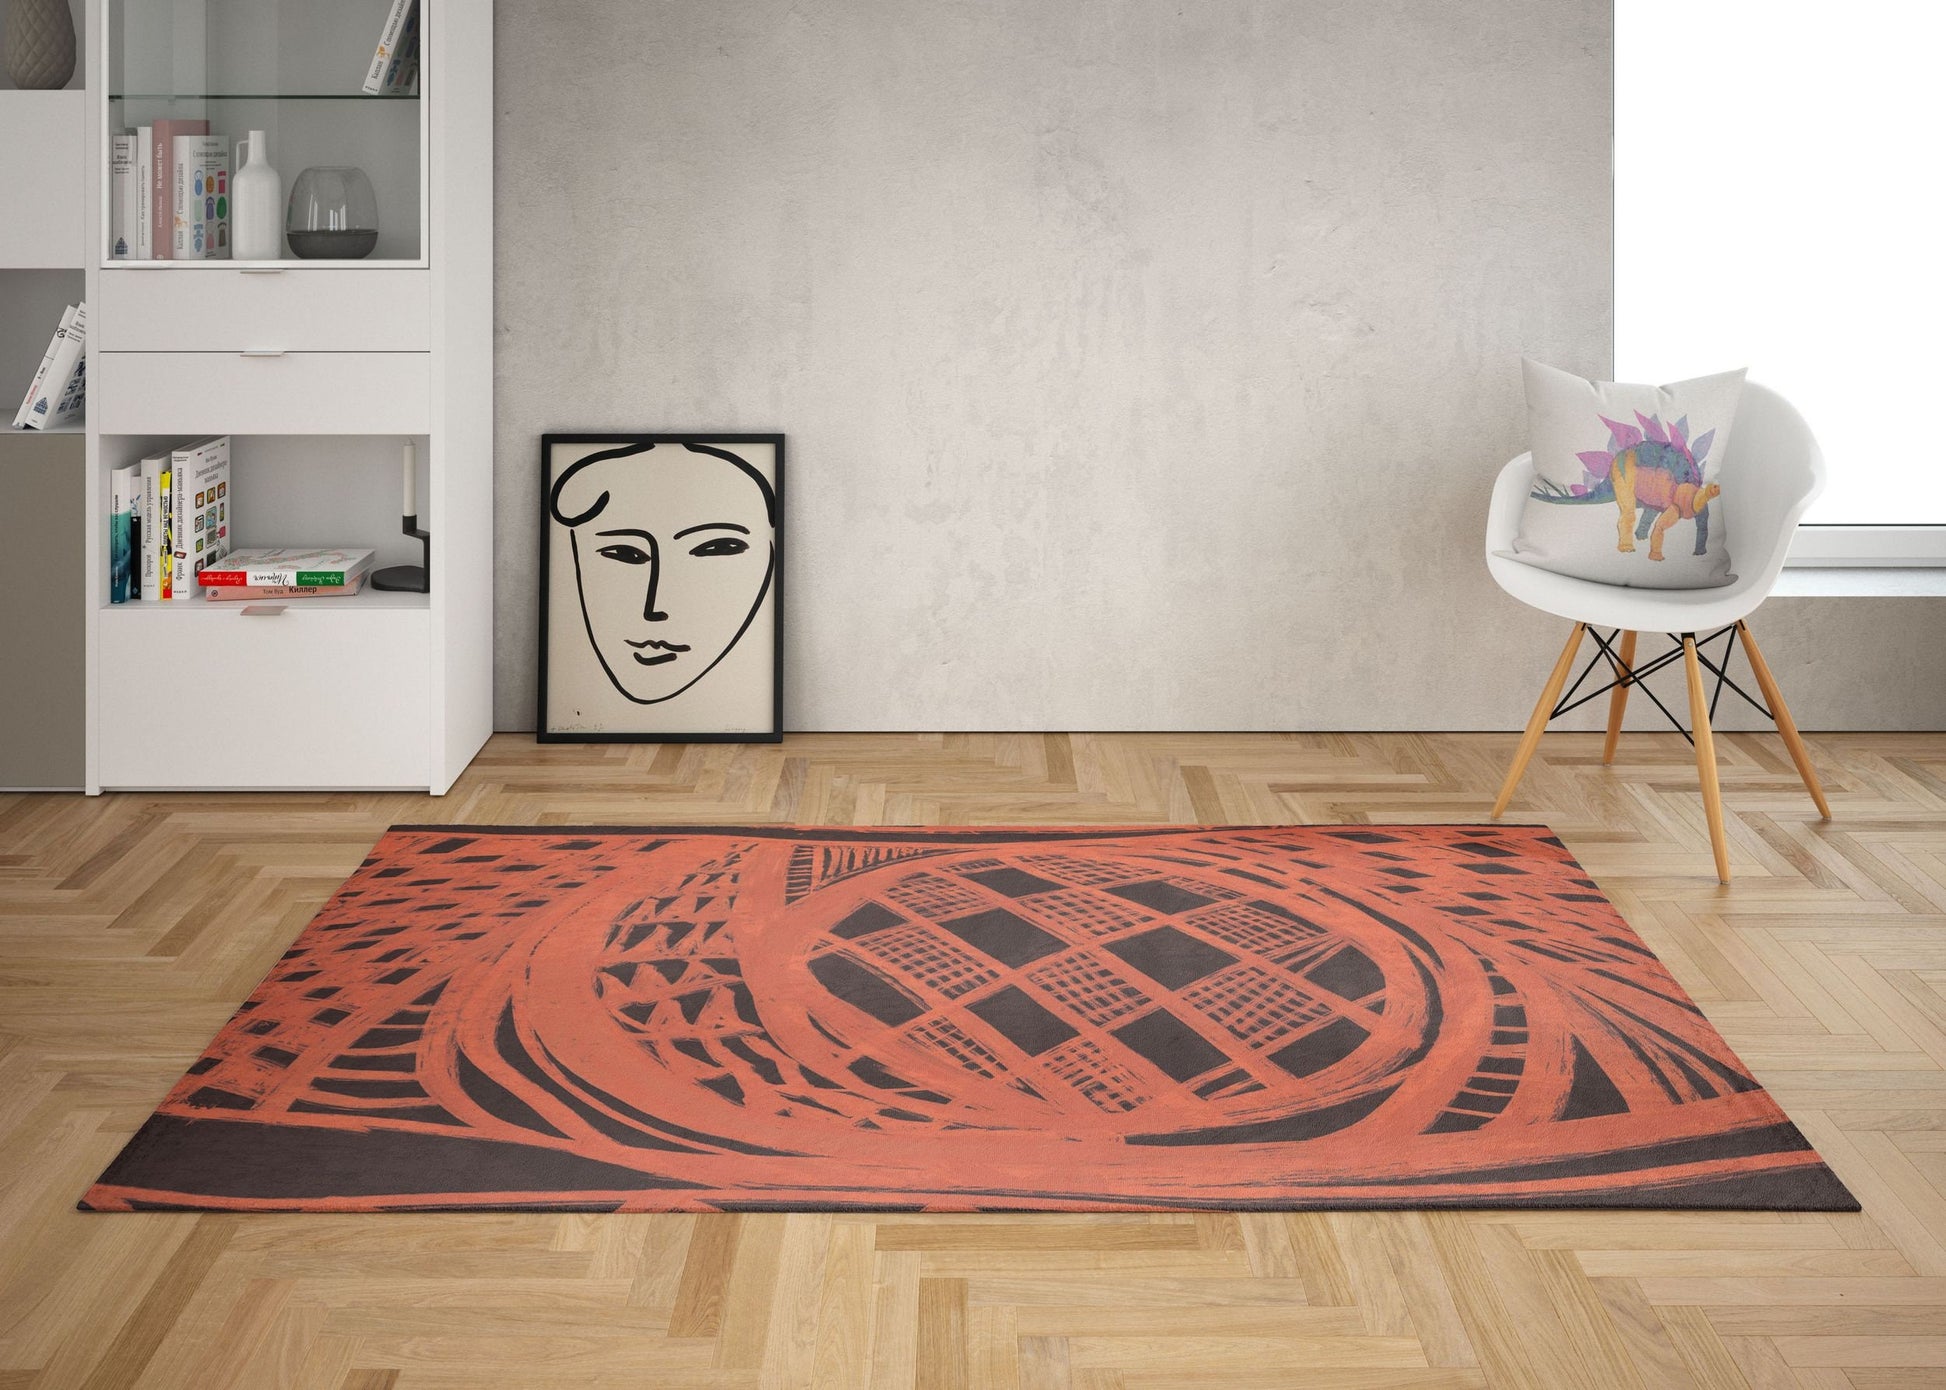 Rugs And Carpet, Oversize Rug, Thick Carpet, Rectangle Rug, Red And Black Rug, Abstract Rug, Modern Rug, Made In Usa, Flat Woven Rug